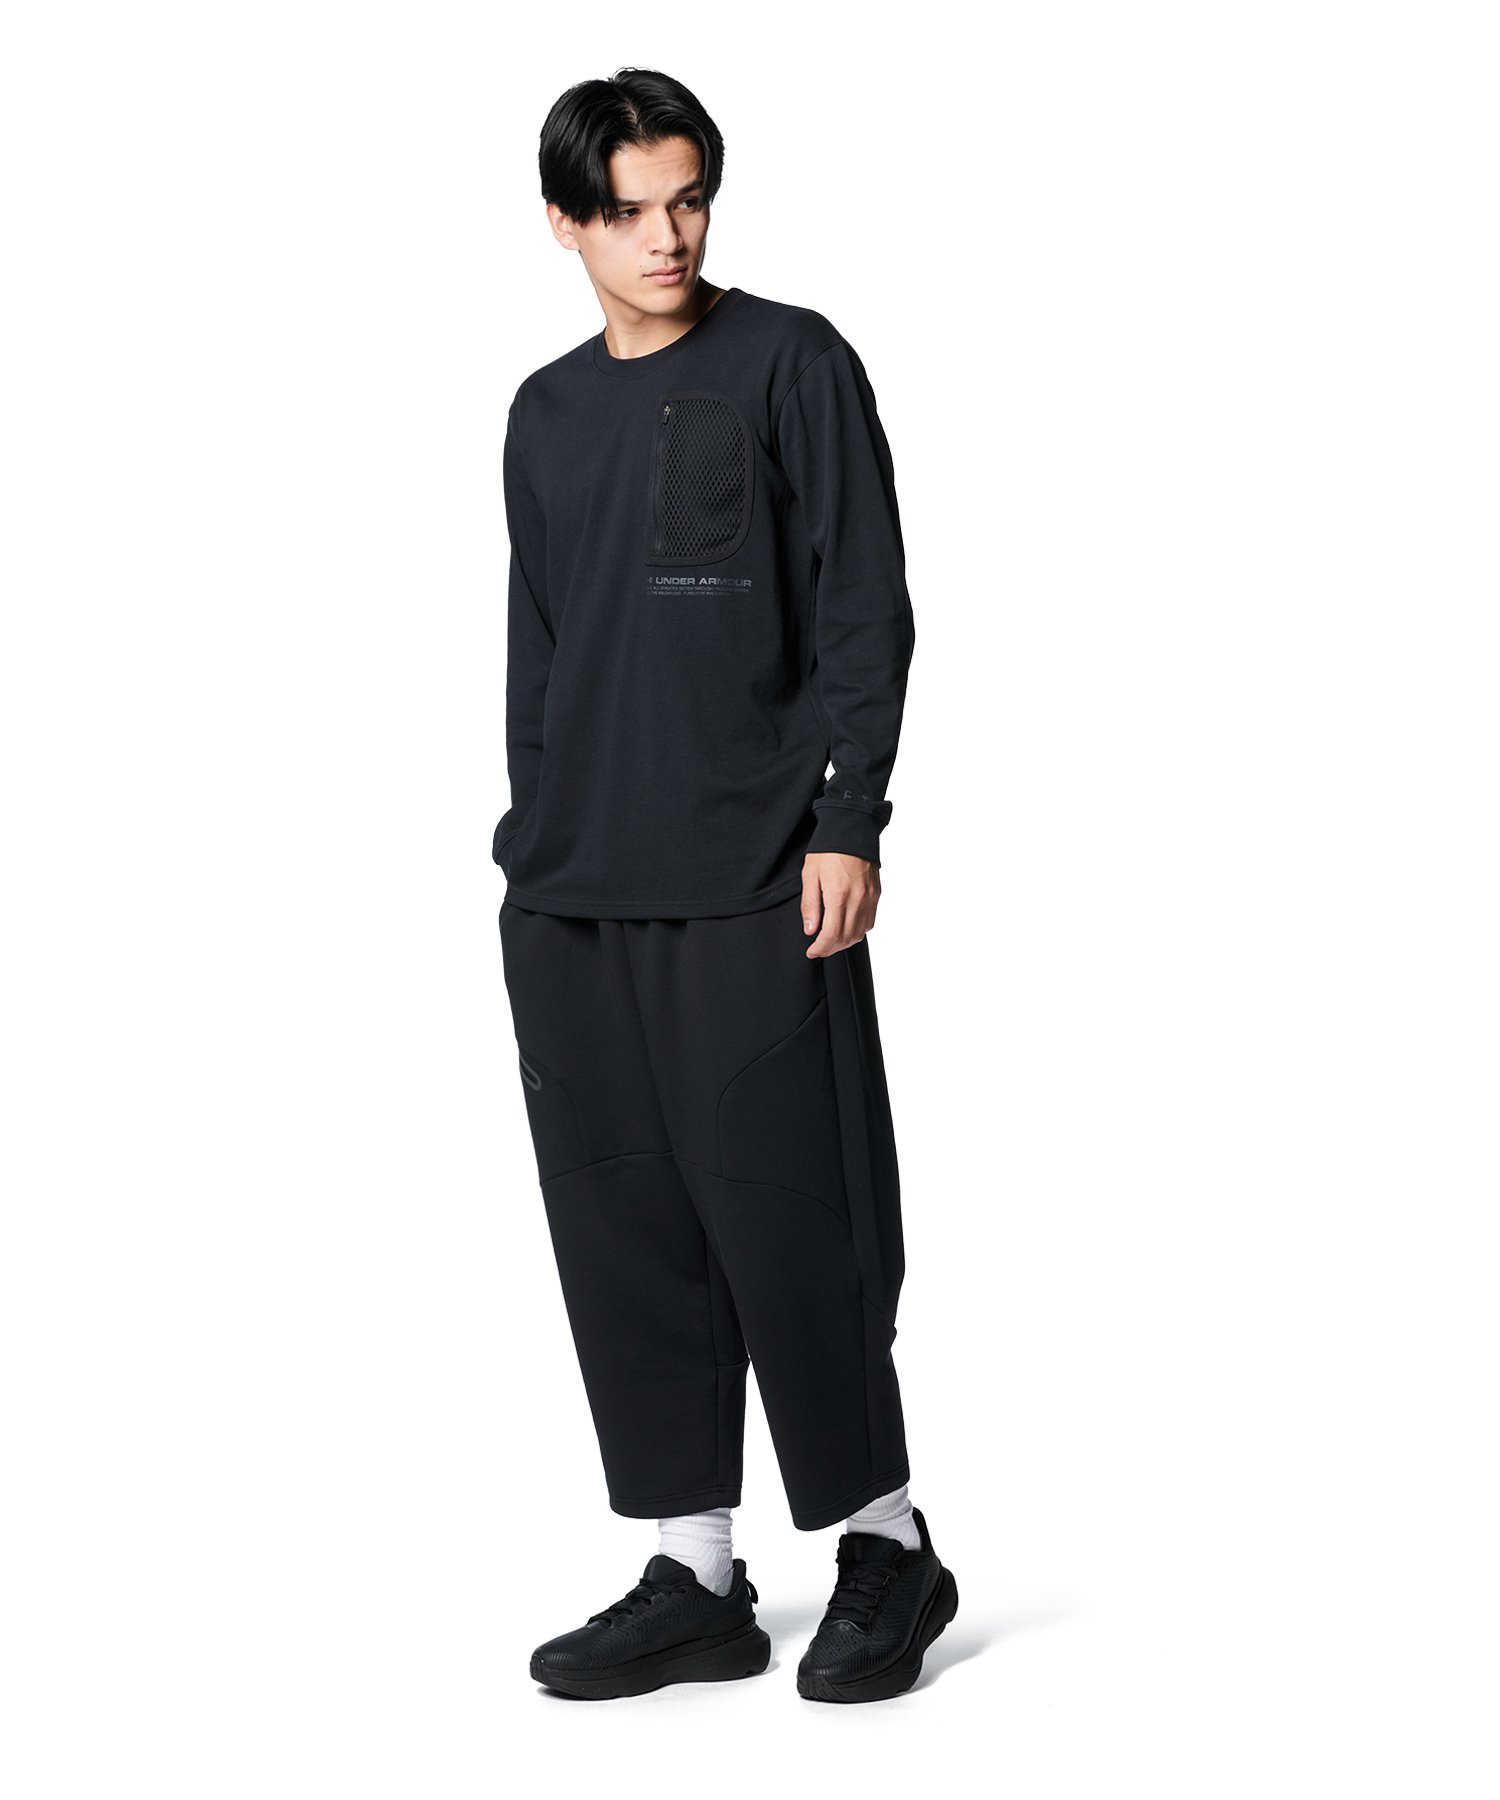 UNDER ARMOUR Unstoppable Fleece BAGGY Crop ズボン 黒 XL 男